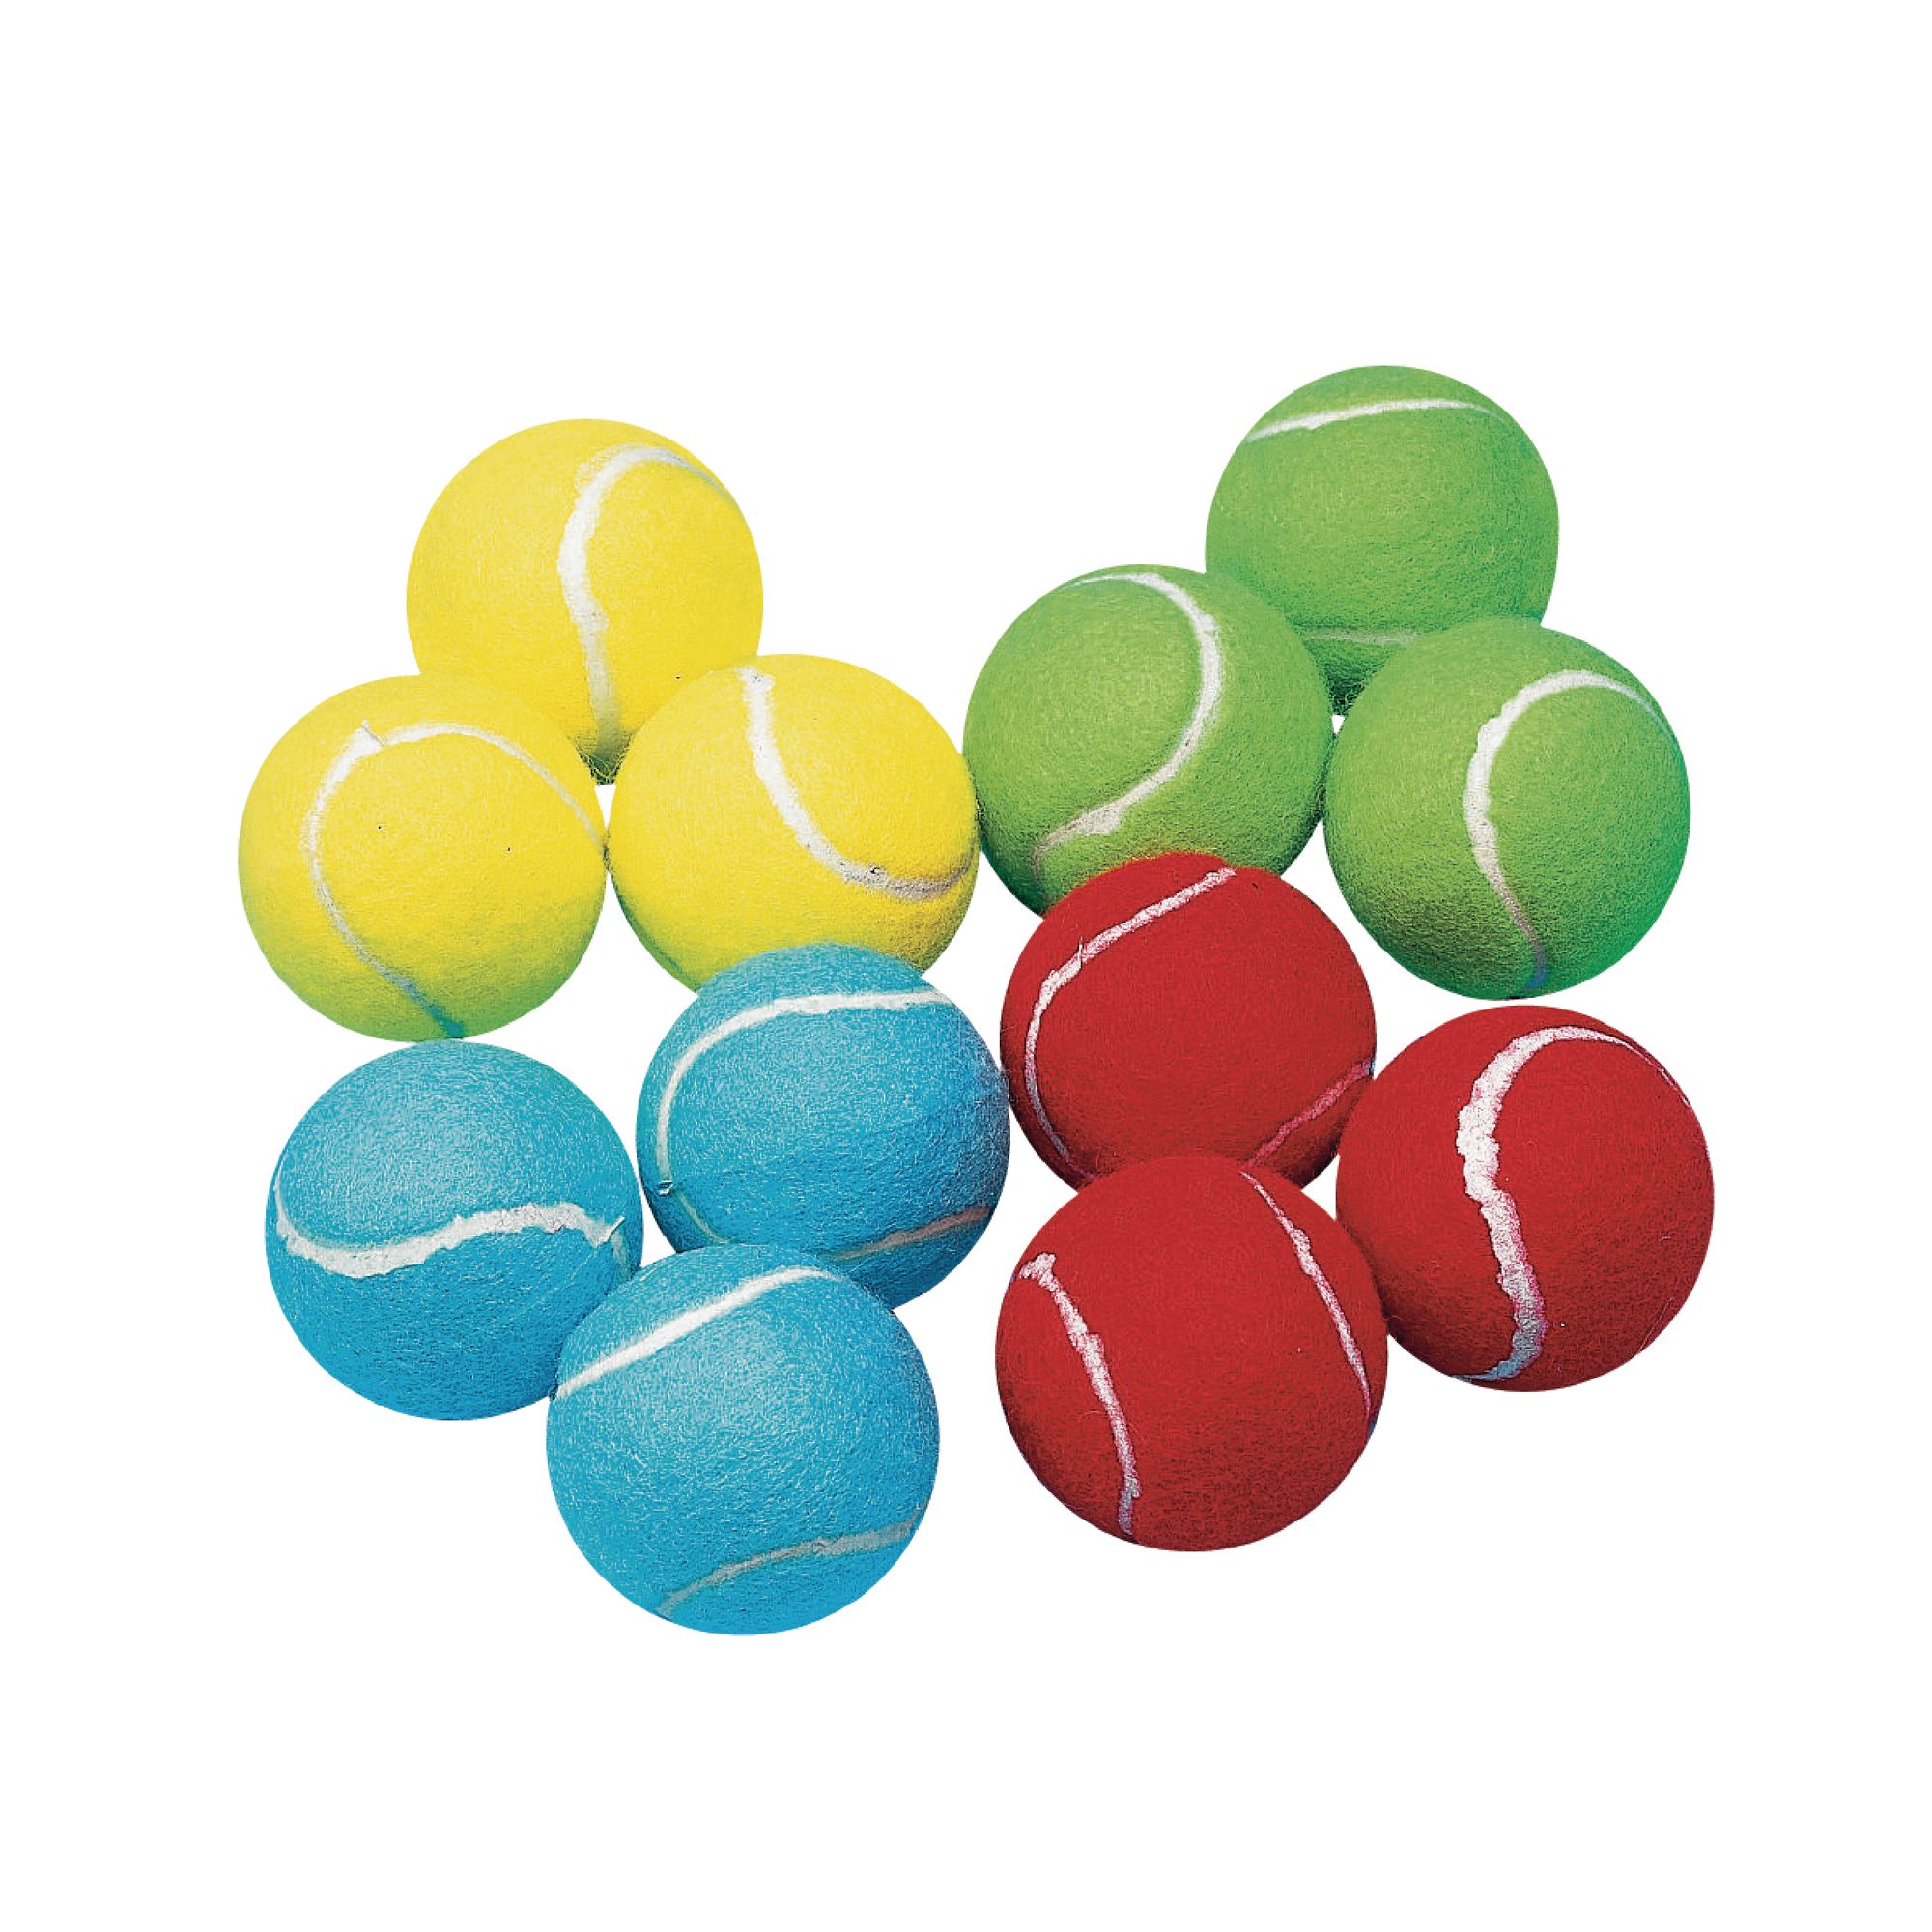 Gamester Multicoloured Perforated Balls 12 Pack 